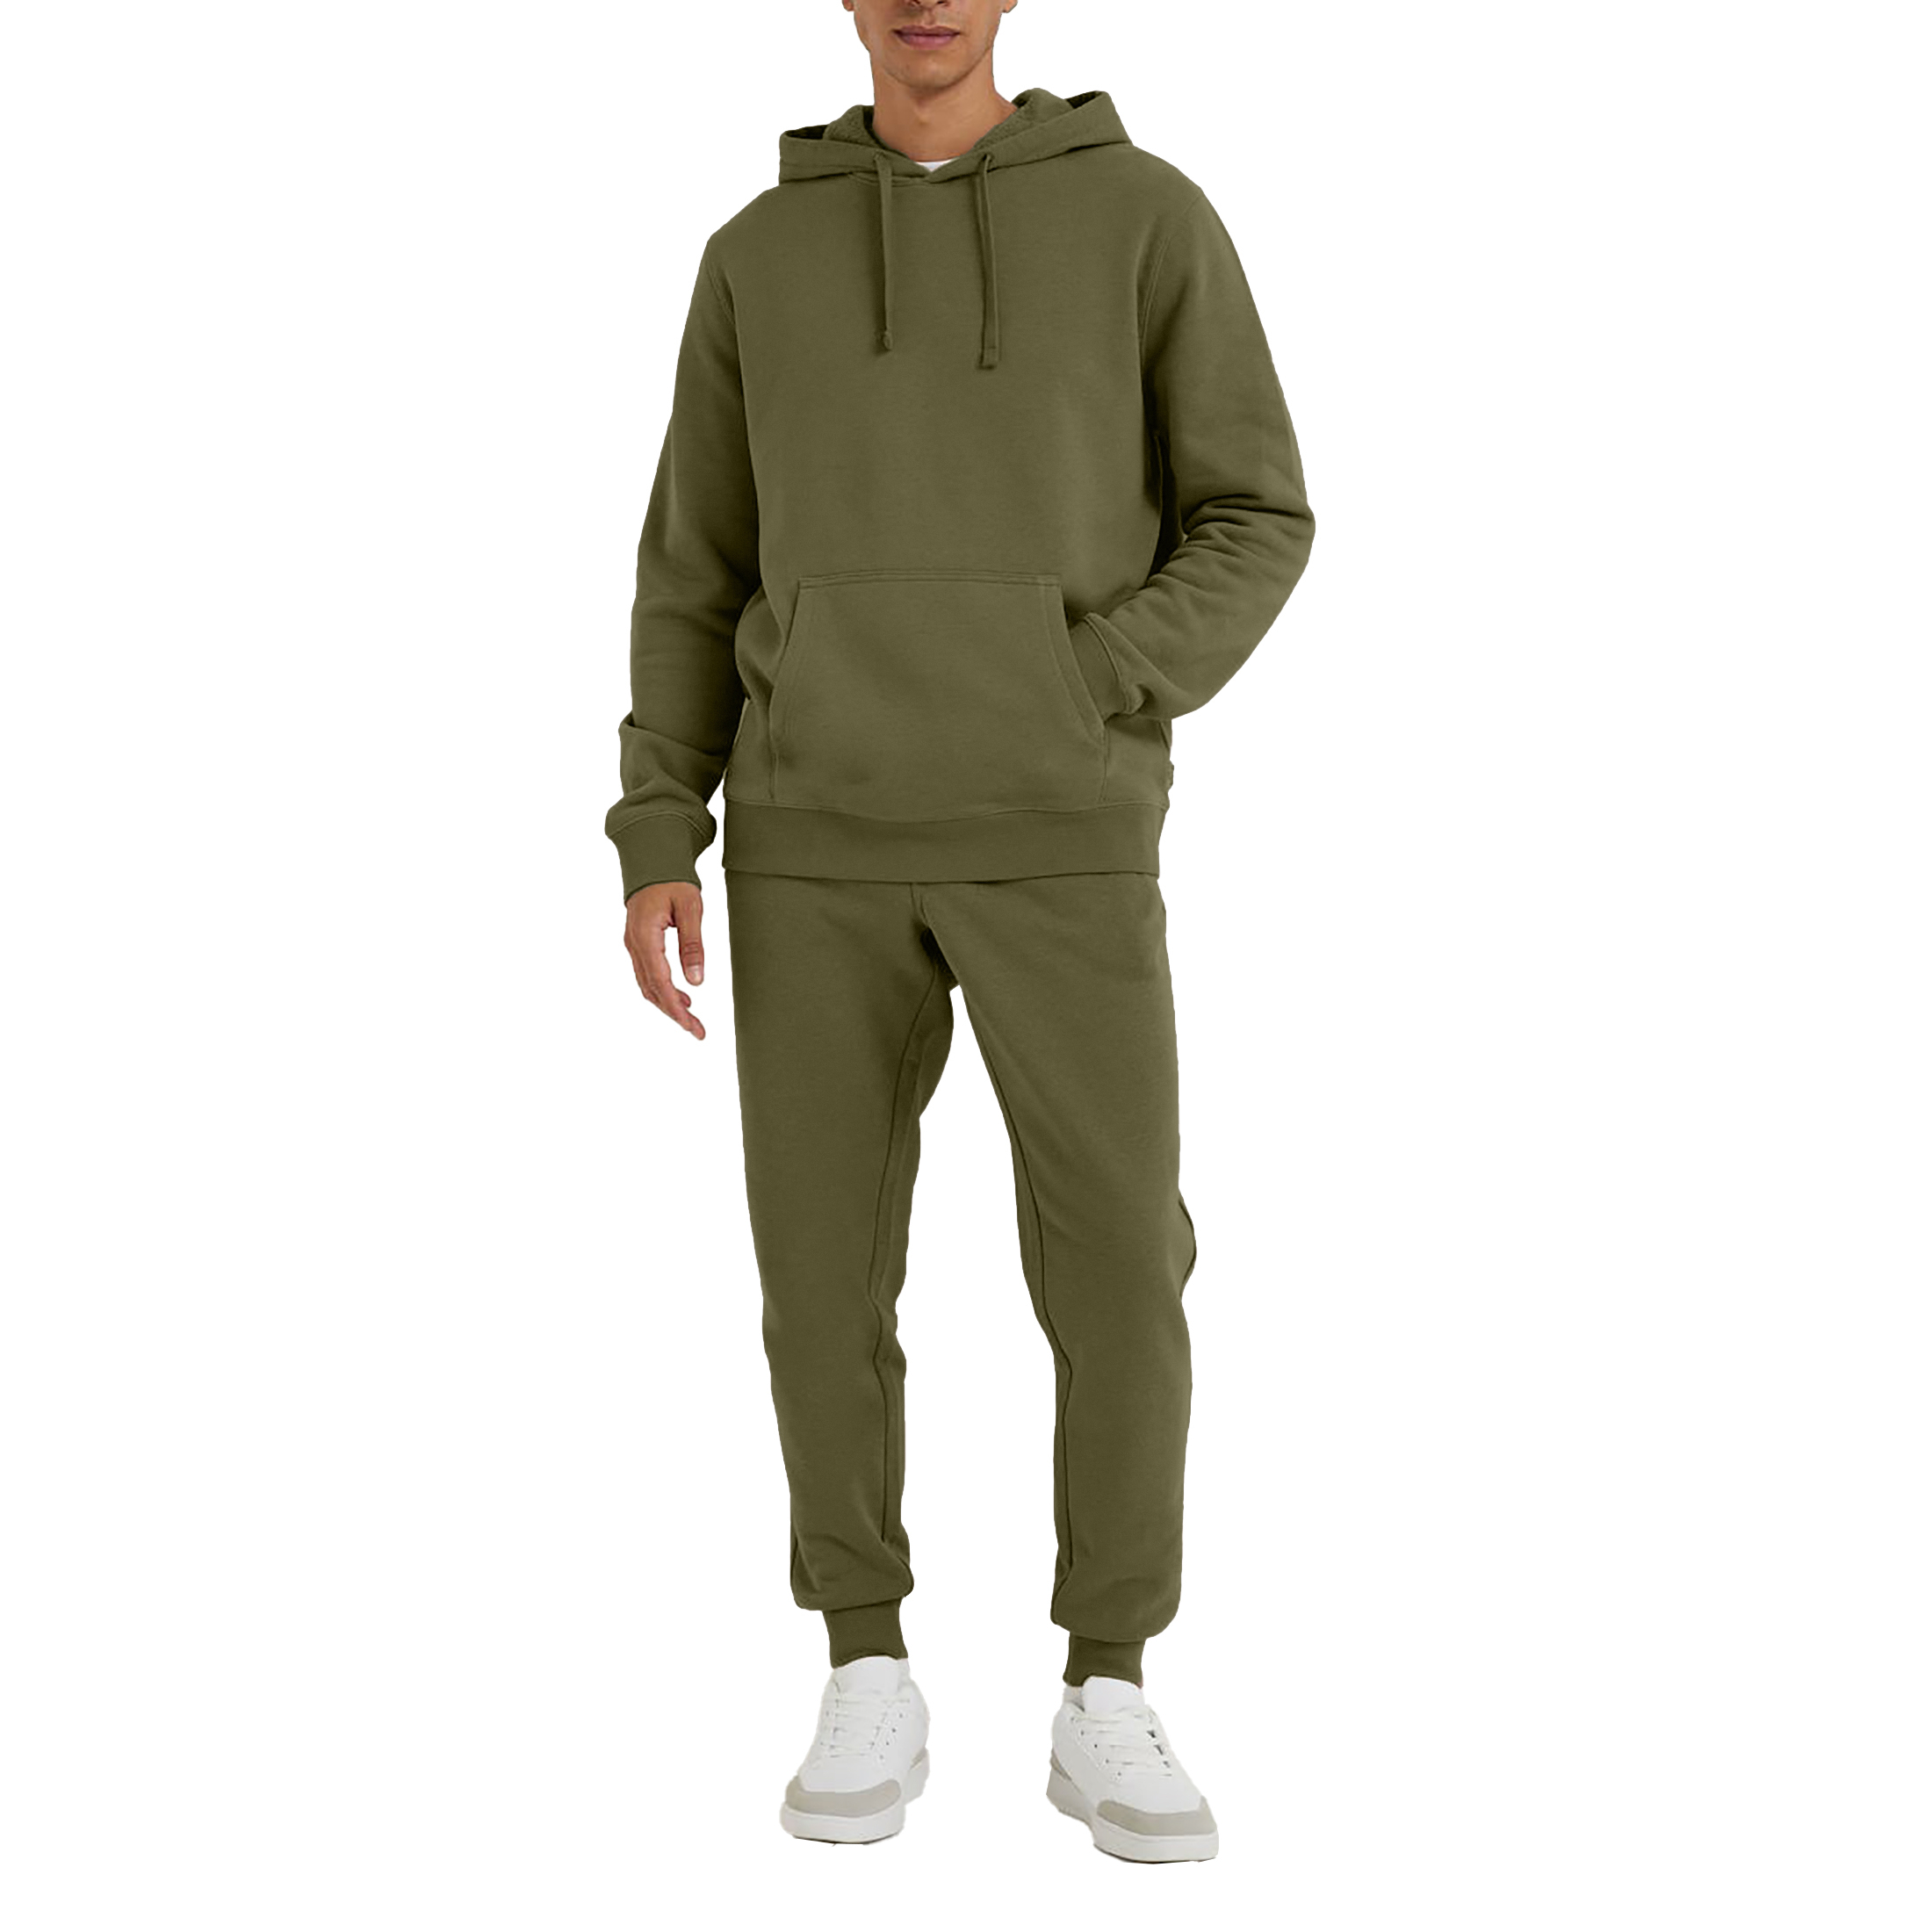 Men's Athletic Warm Jogging Pullover Active Tracksuit - Olive, Small